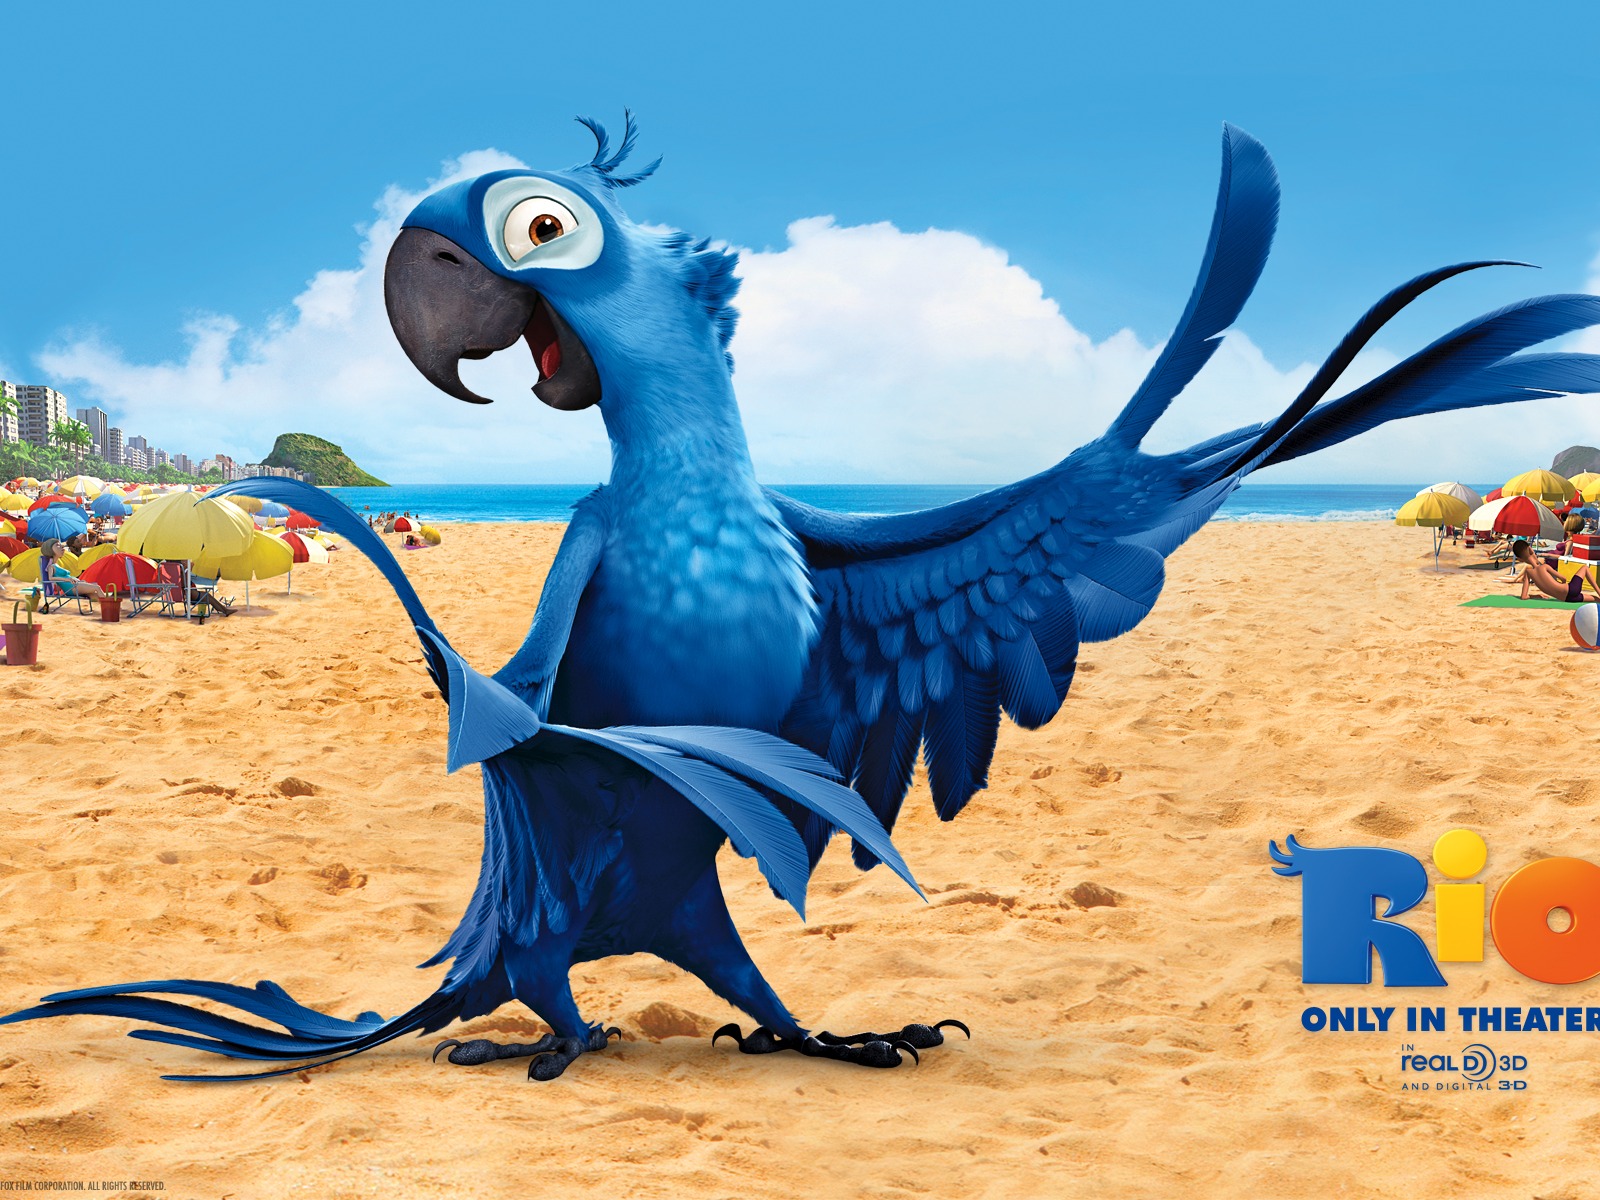 Rio 2011 wallpapers #2 - 1600x1200